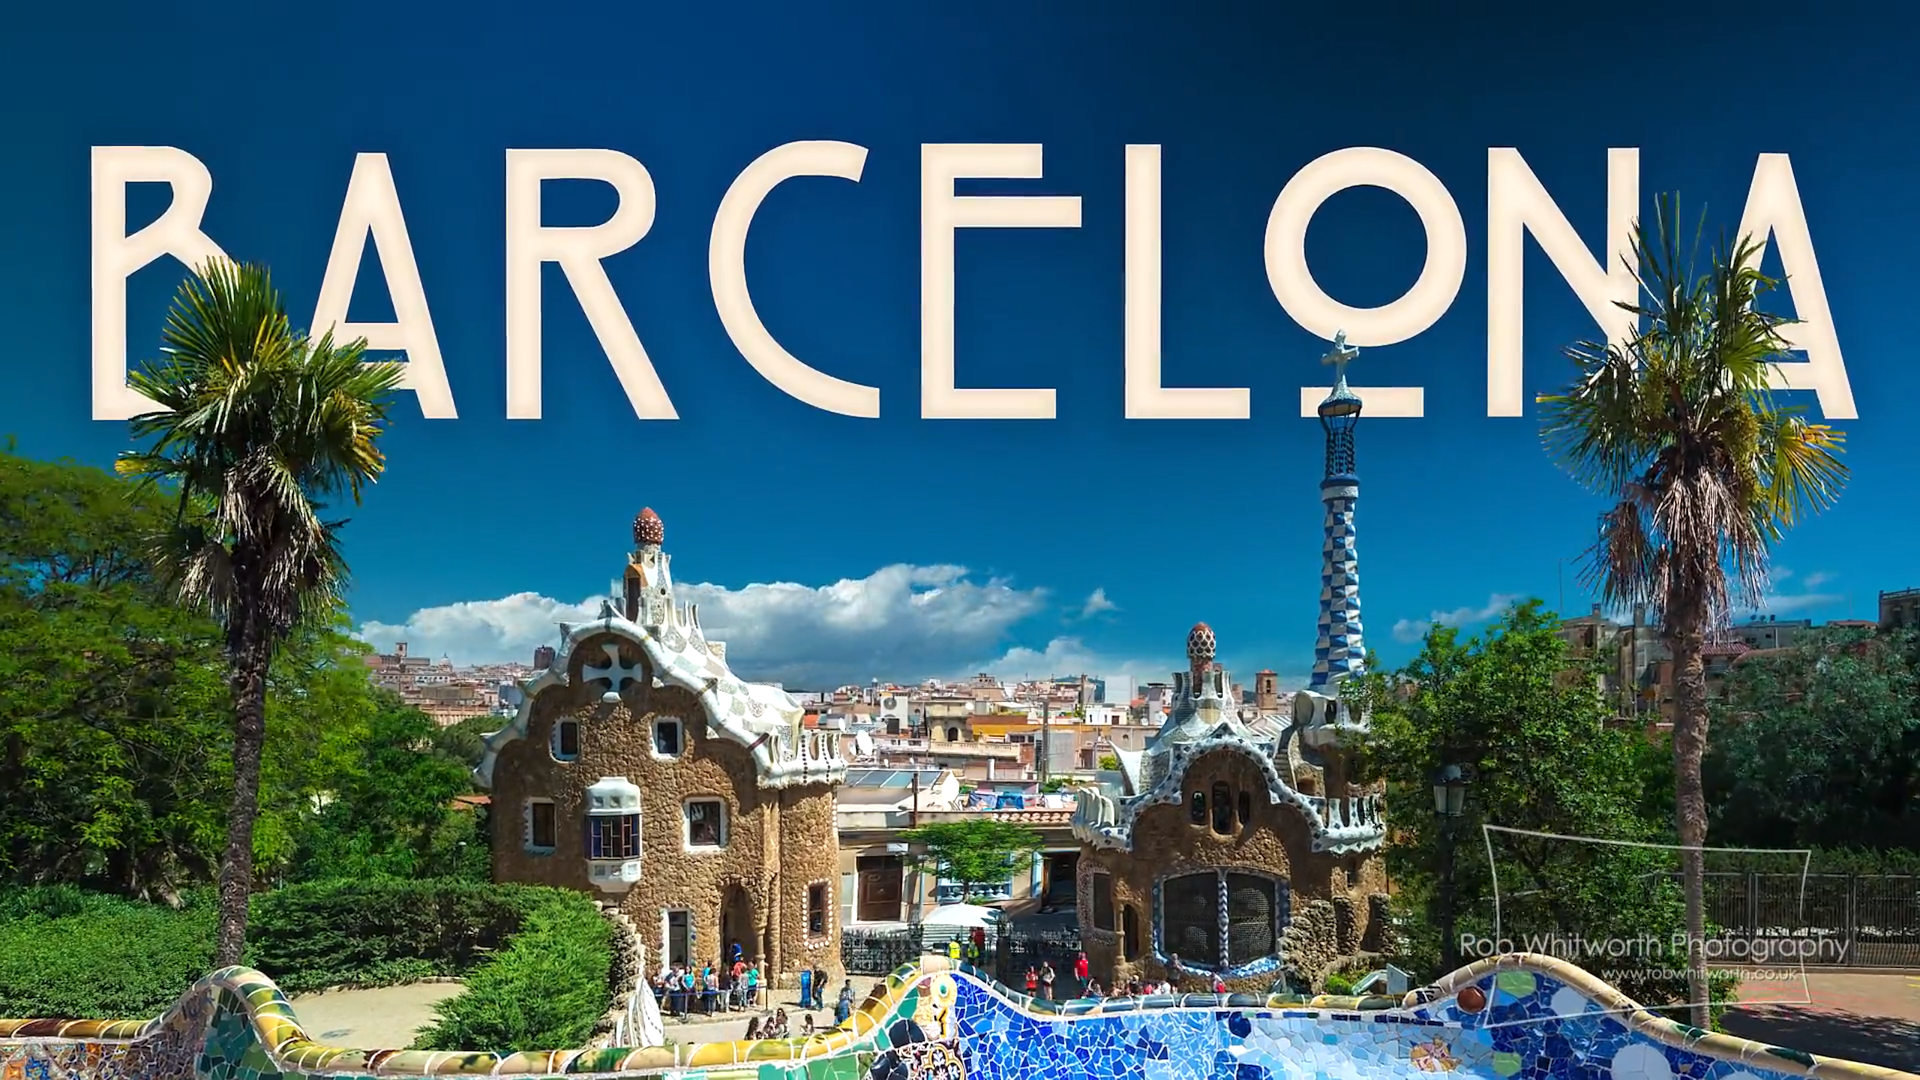 See Barcelona Spain as if you only had two minutes and were hopped up on meth.